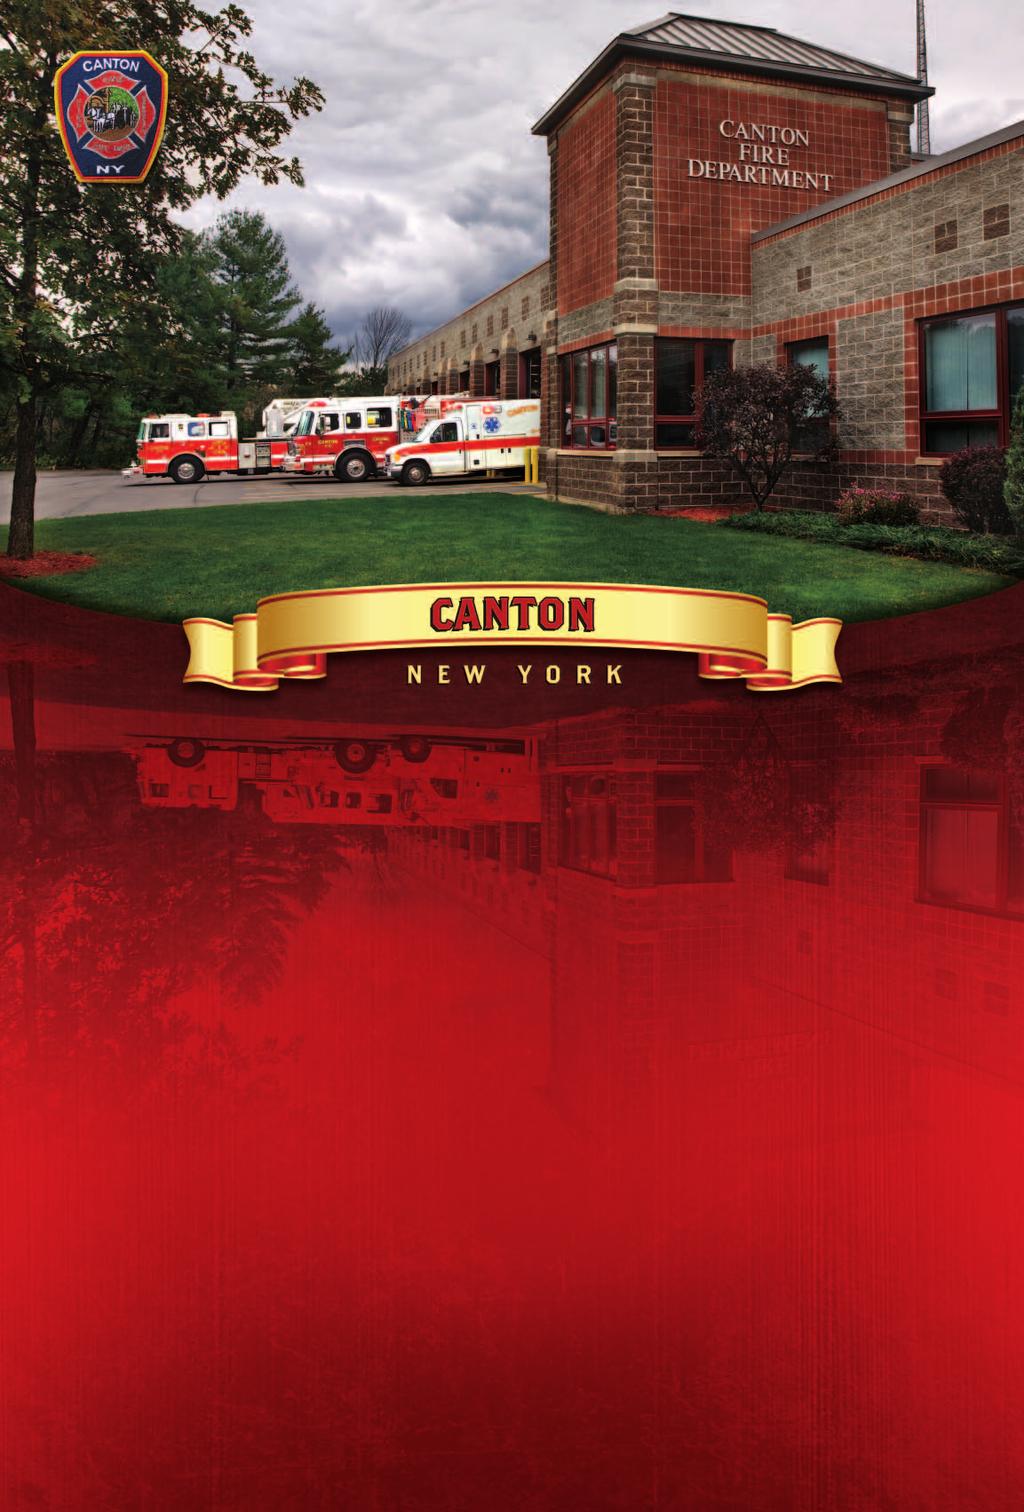 Canton Volunteer Fire Department Proudly Serving the Canton Community Since 1869 OCTOBER 1 2 3 4 5 6 7 8 Columbus Day Thanksgiving Day Canada Last Quarter Moon 9 10 11 12 13 14 15 New Moon 16 17 18